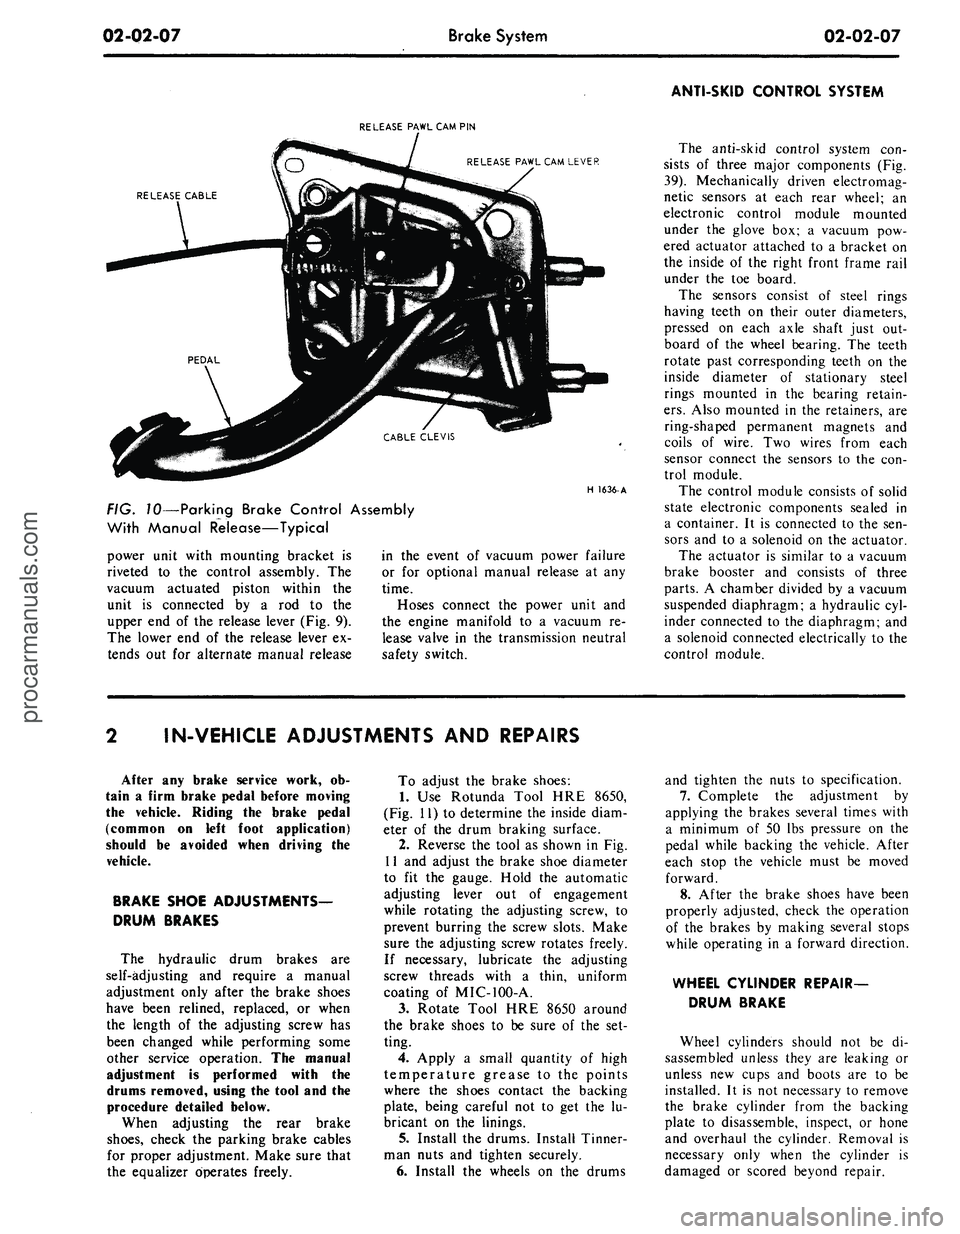 FORD MUSTANG 1969  Volume One Chassis 
02-02-07 
Brake System

02-02-07

ANTI-SKID CONTROL SYSTEM

RELEASE PAWL CAM PIN

RELEASE PAWL CAM LEVER

RELEASE CABLE

H
 1636-
 A

FIG. 10—Parking Brake Control Assembly

With Manual Release—T